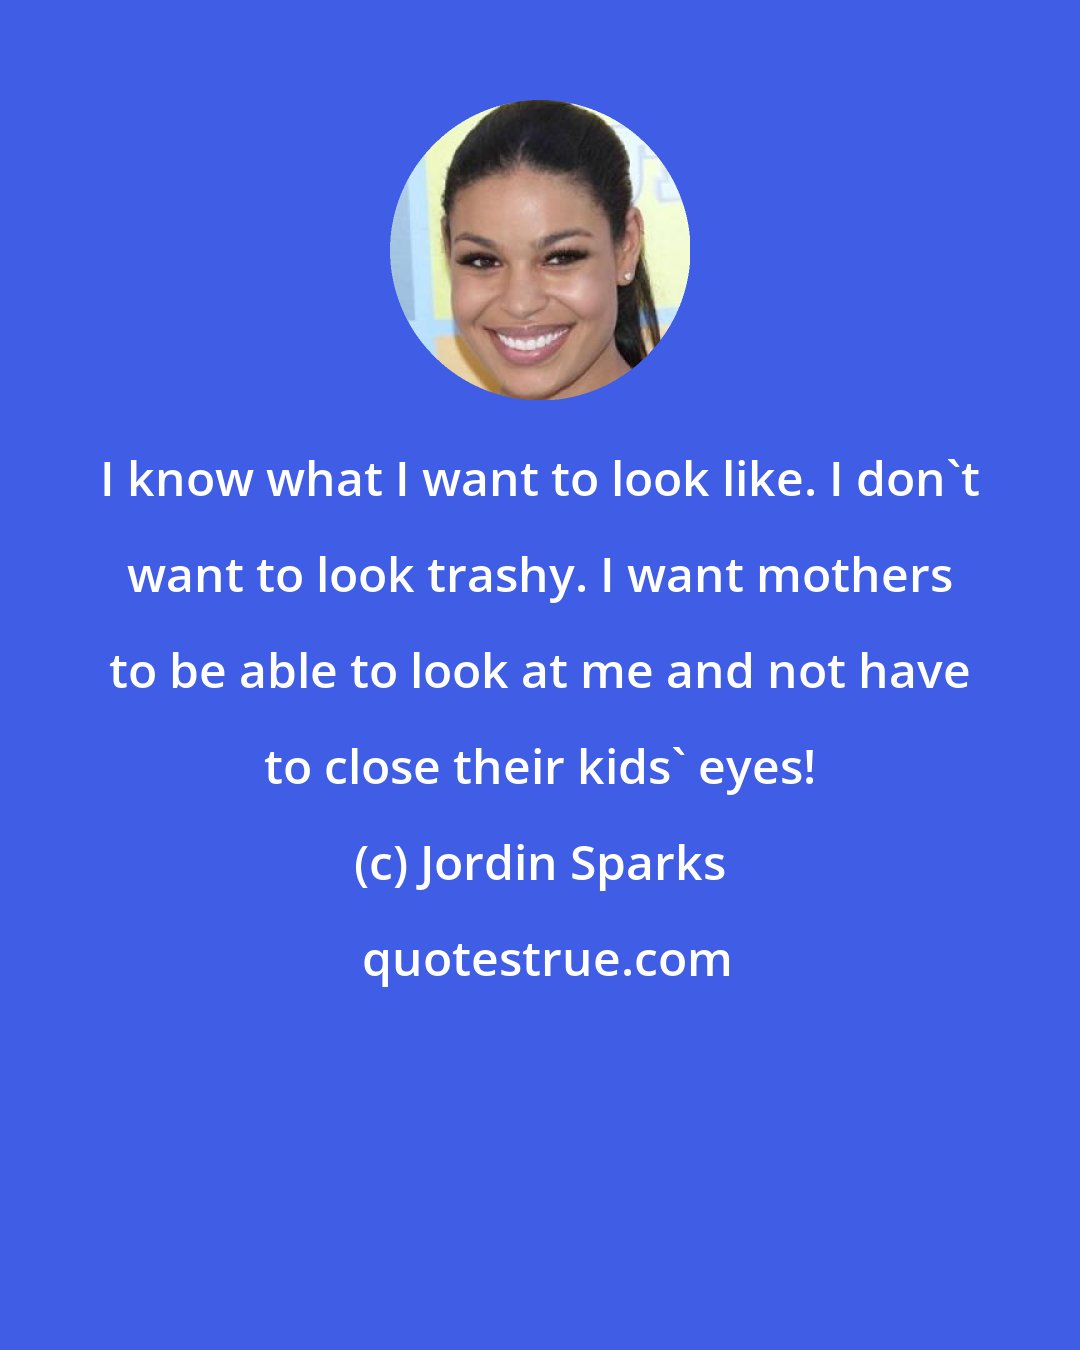 Jordin Sparks: I know what I want to look like. I don't want to look trashy. I want mothers to be able to look at me and not have to close their kids' eyes!